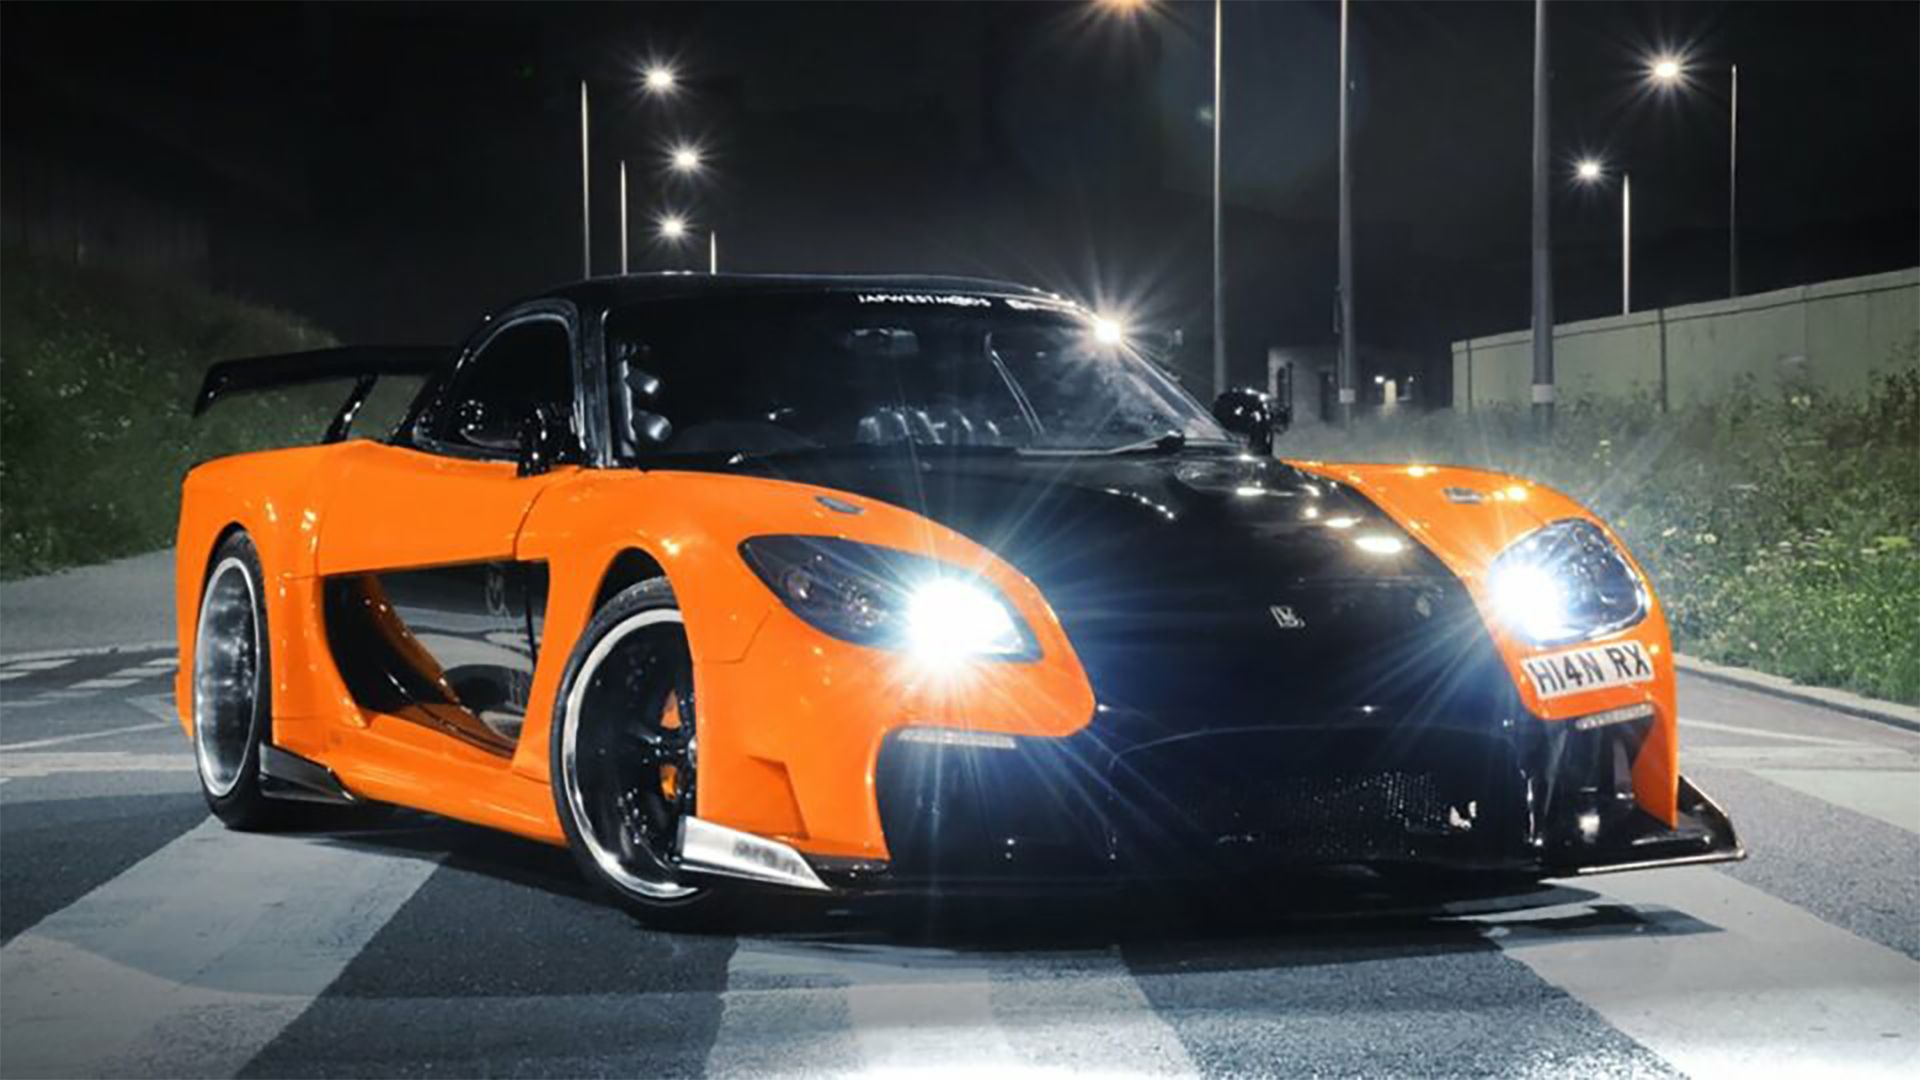 The black and orange 1997 Mazda RX-7 from Tokyo Drift